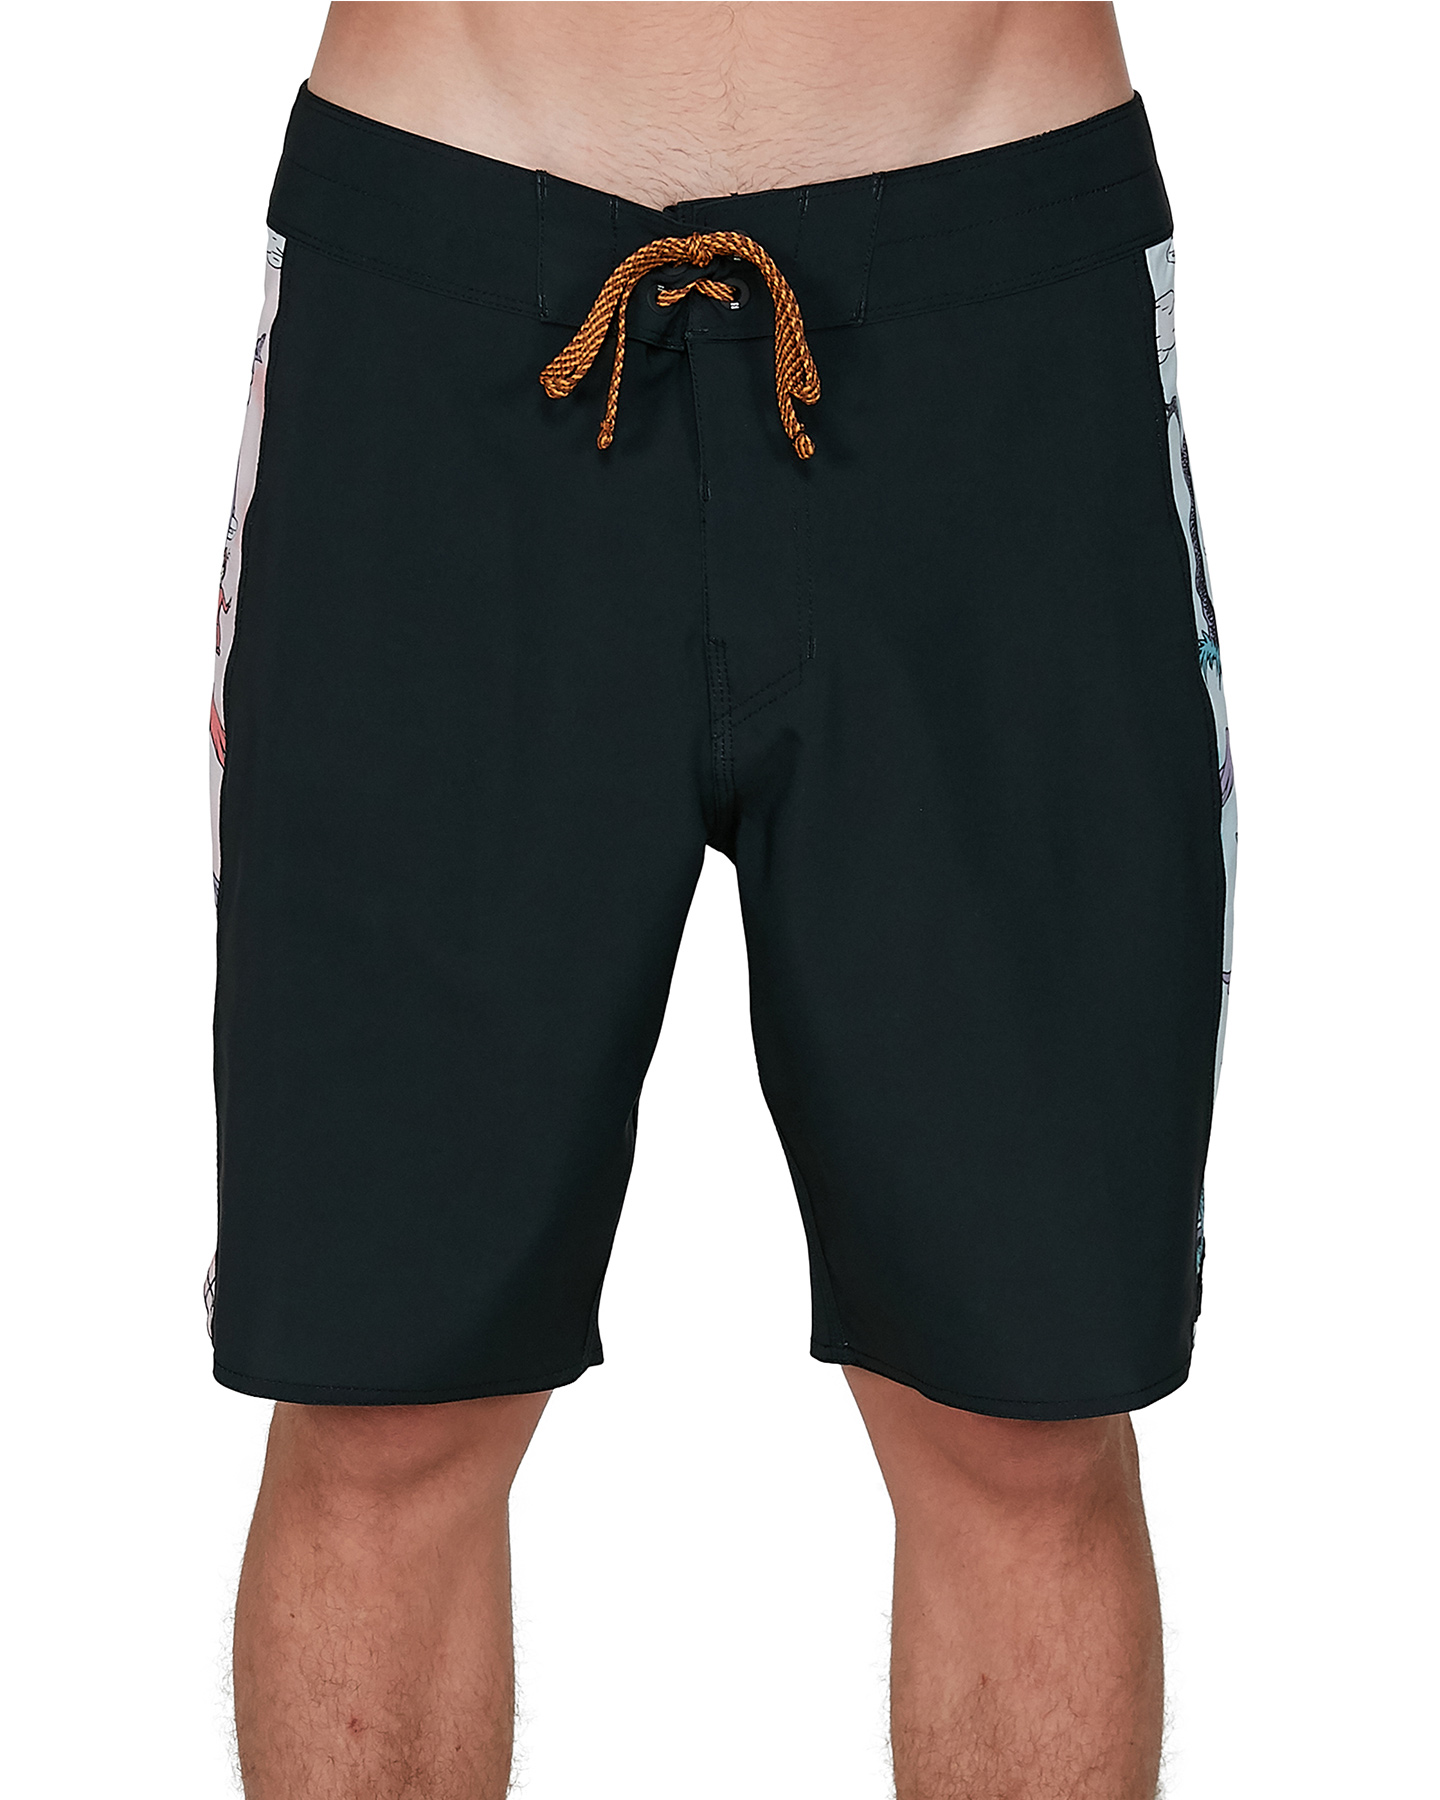 Billabong All The Places Dbah Boardshorts - Black | SurfStitch